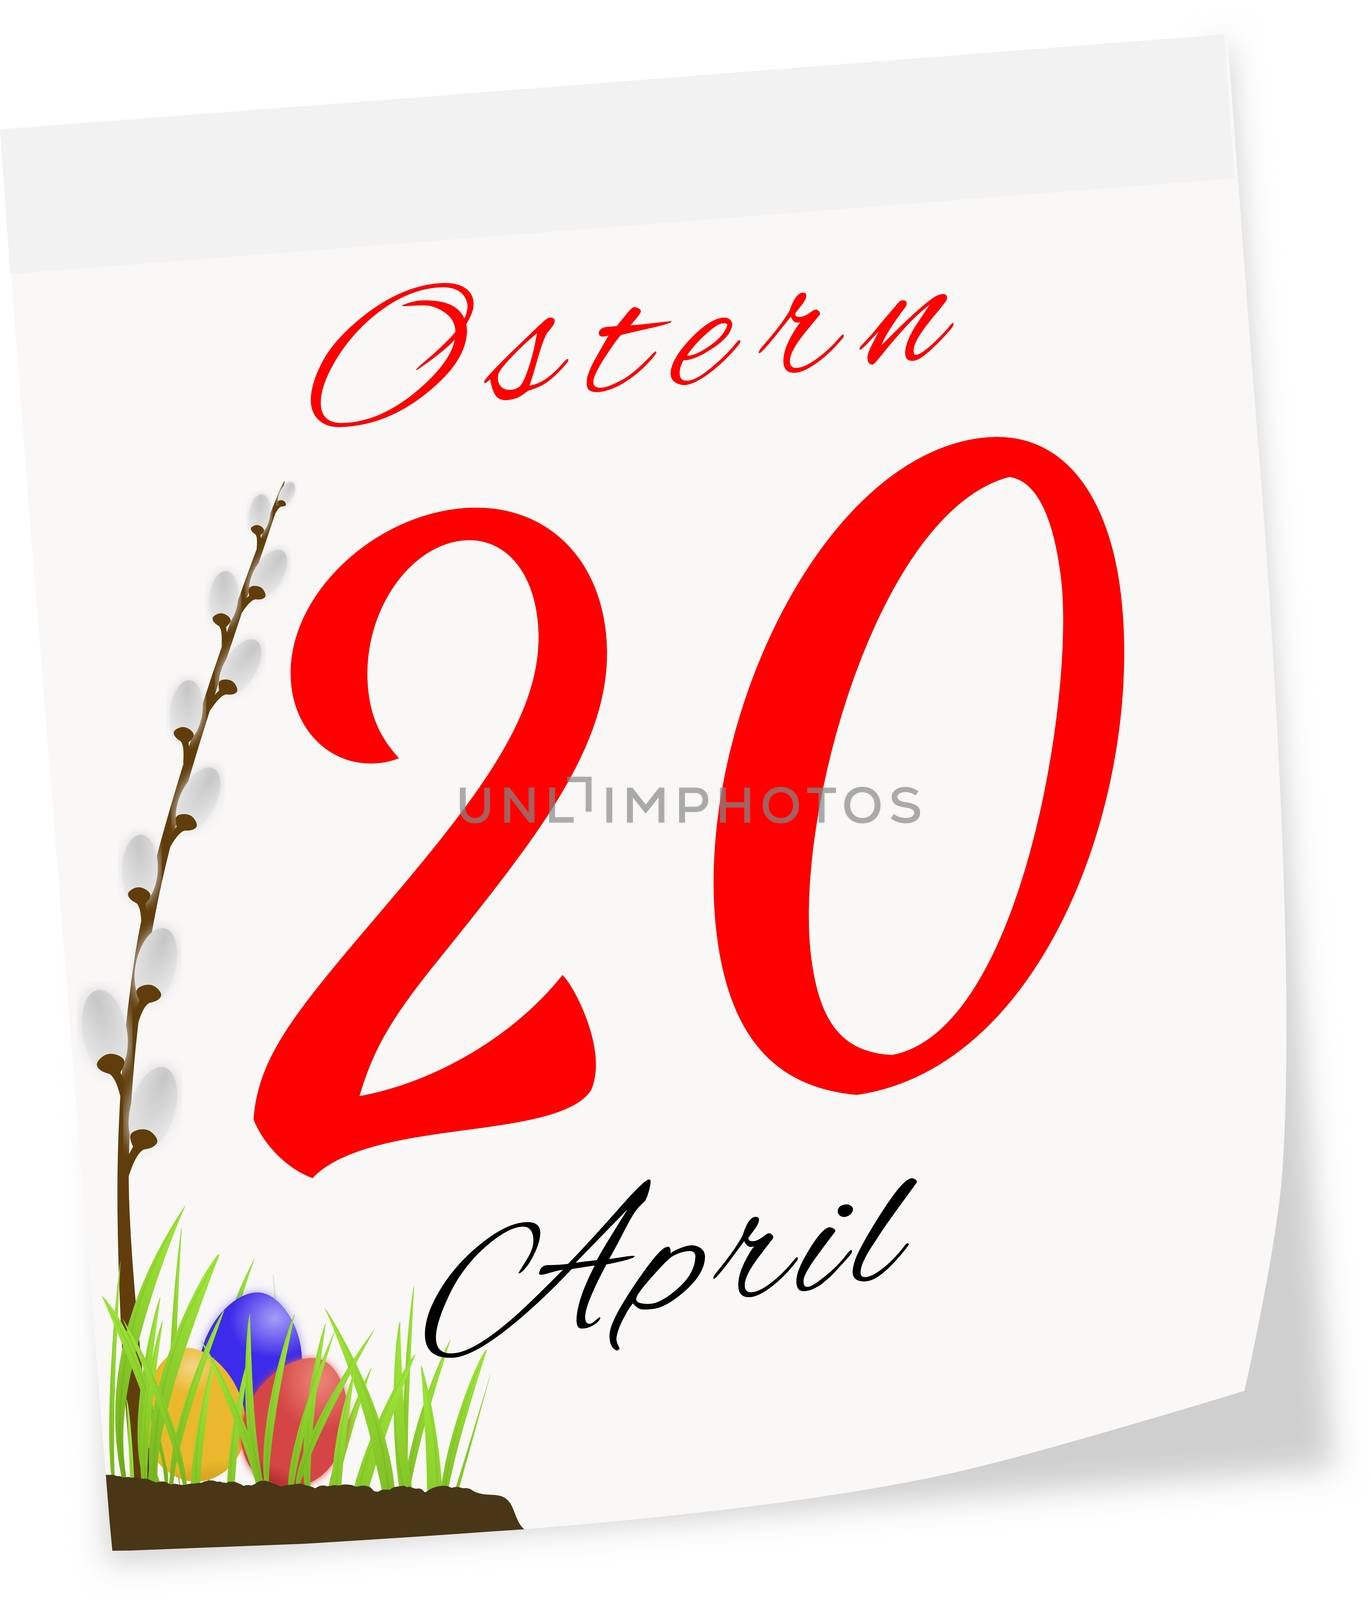 Calendar page with date of Easter-20.04.2014 isolated on a white background